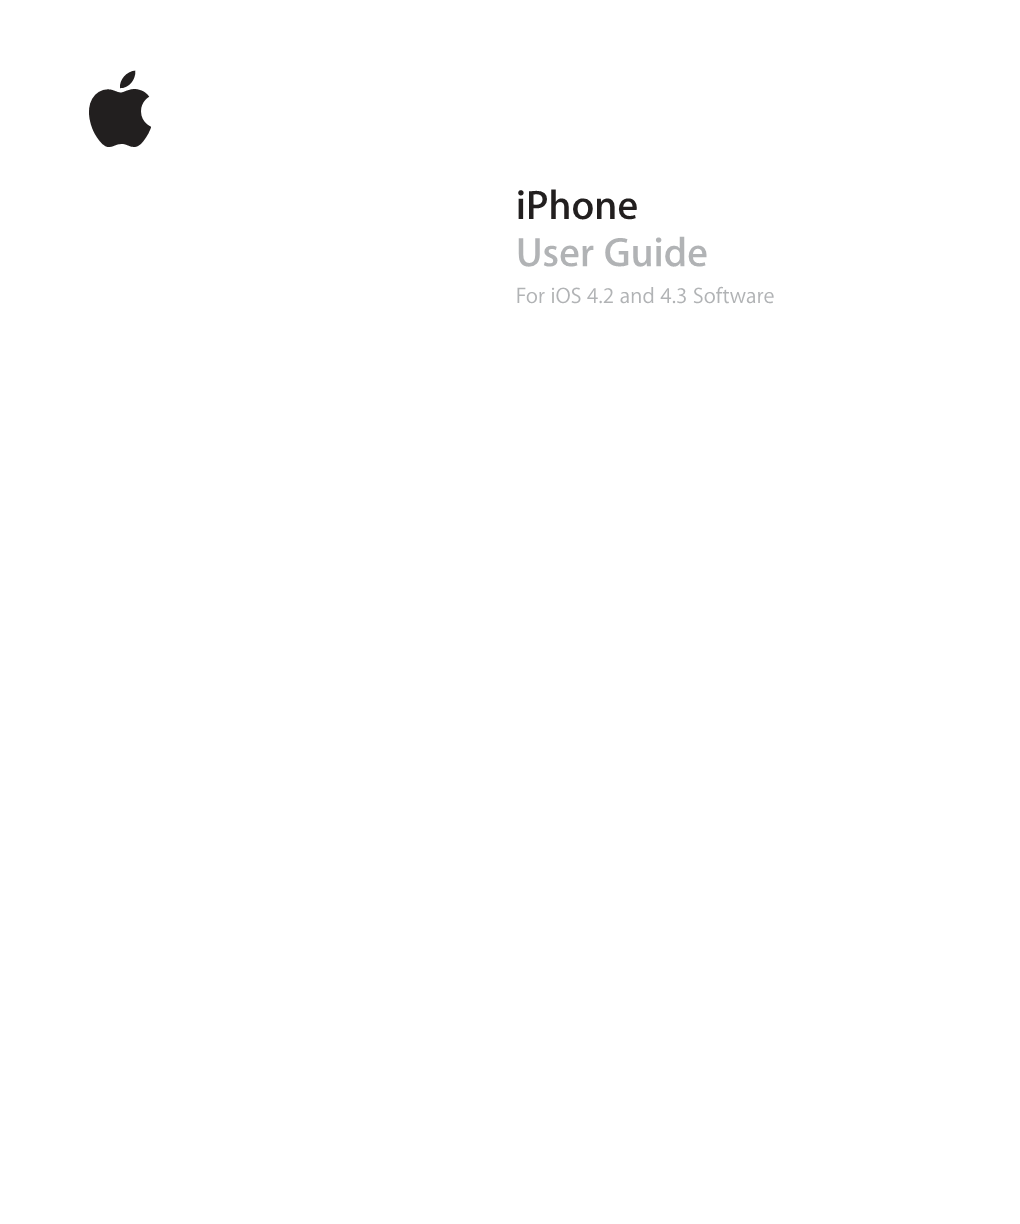 Iphone User Guide for Ios 4.2 and 4.3 Software Contents